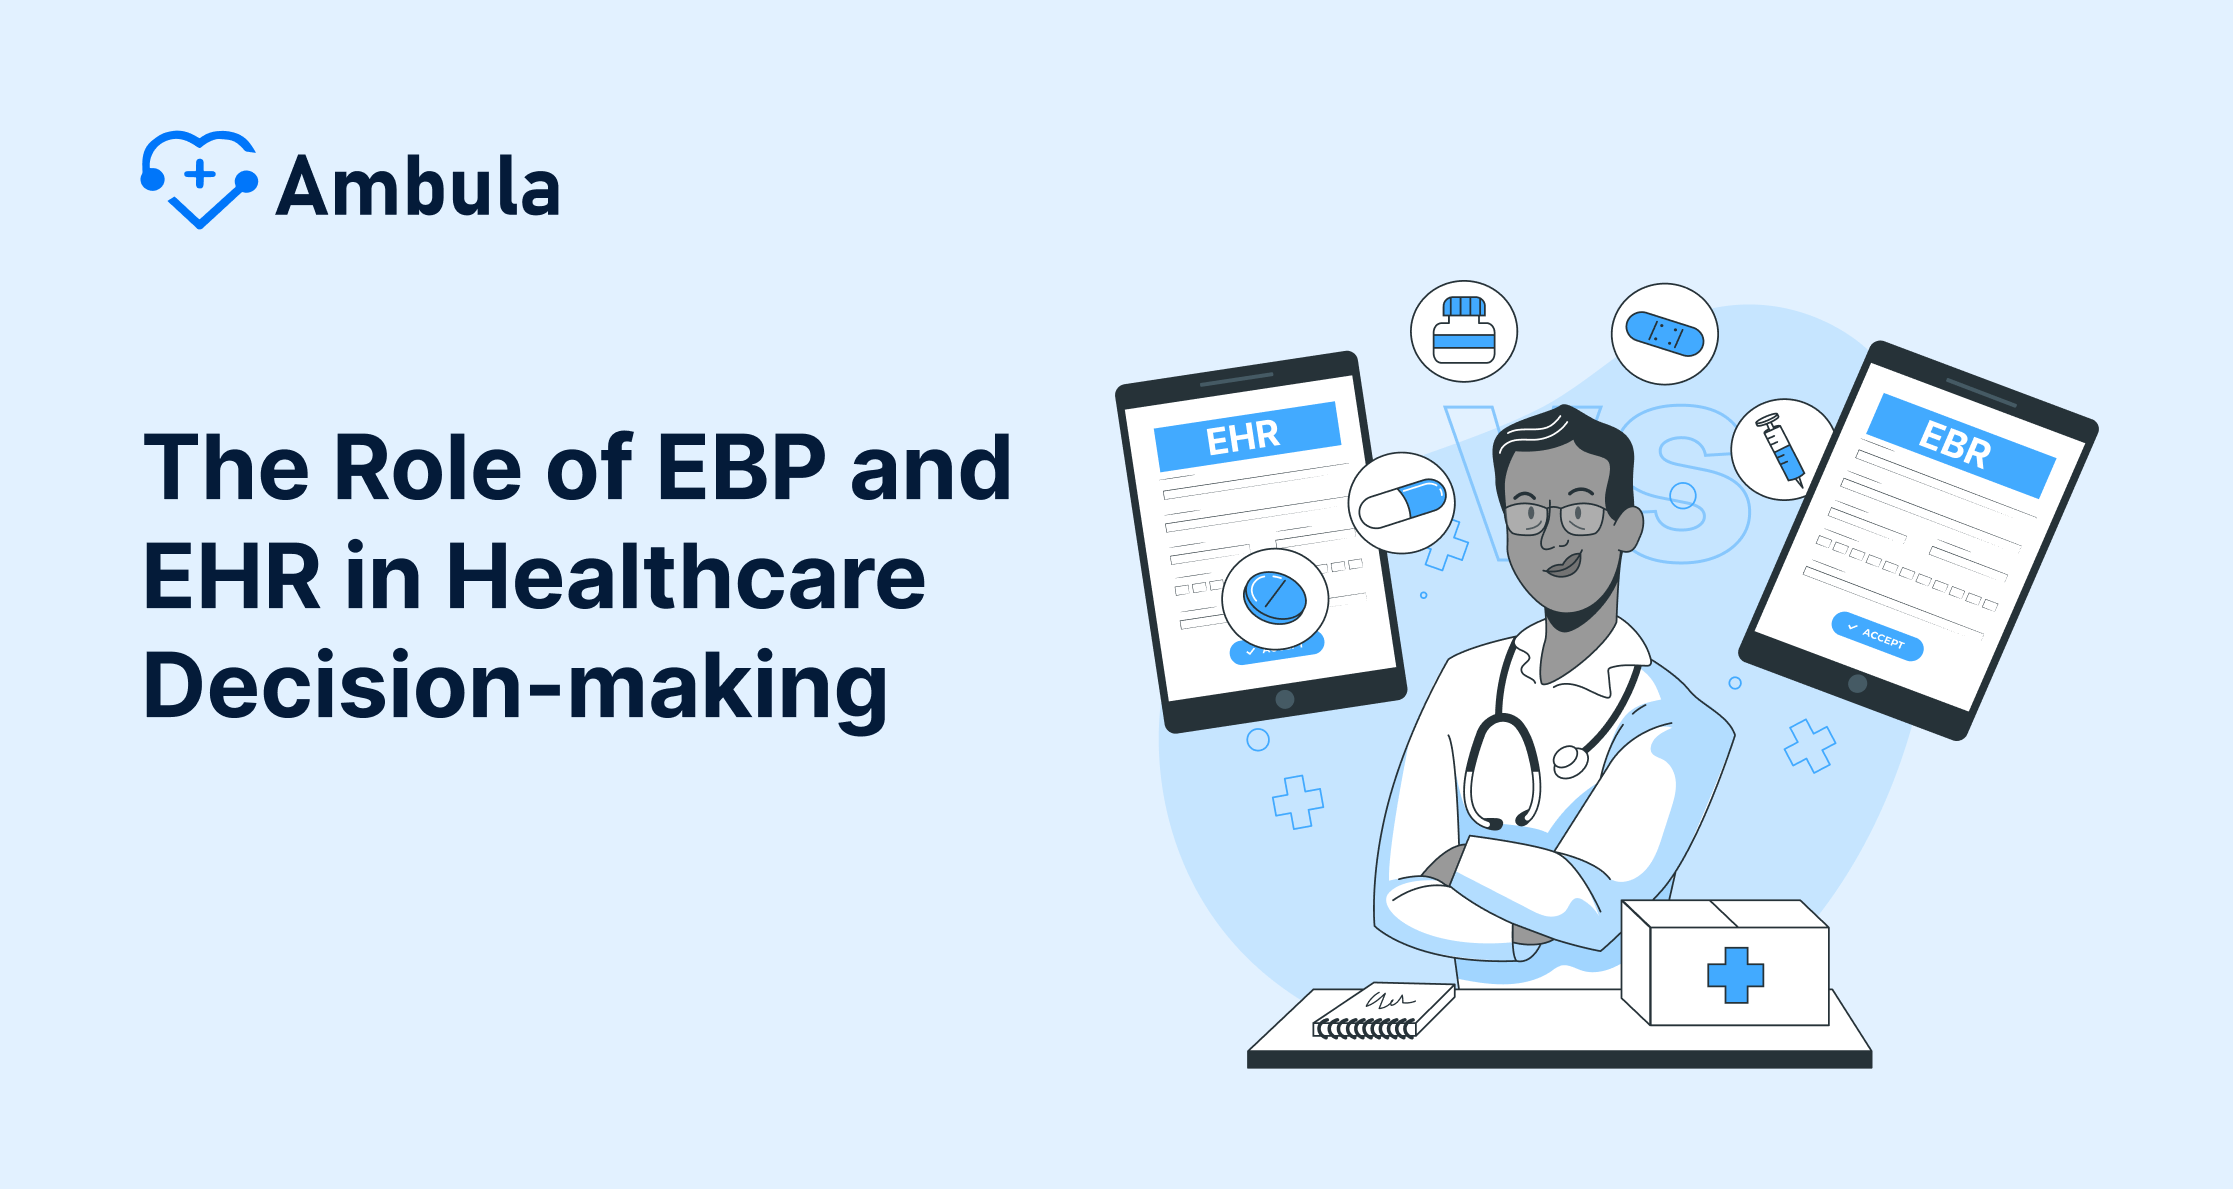 The Role of EBP and EHR in Healthcare Decision-making